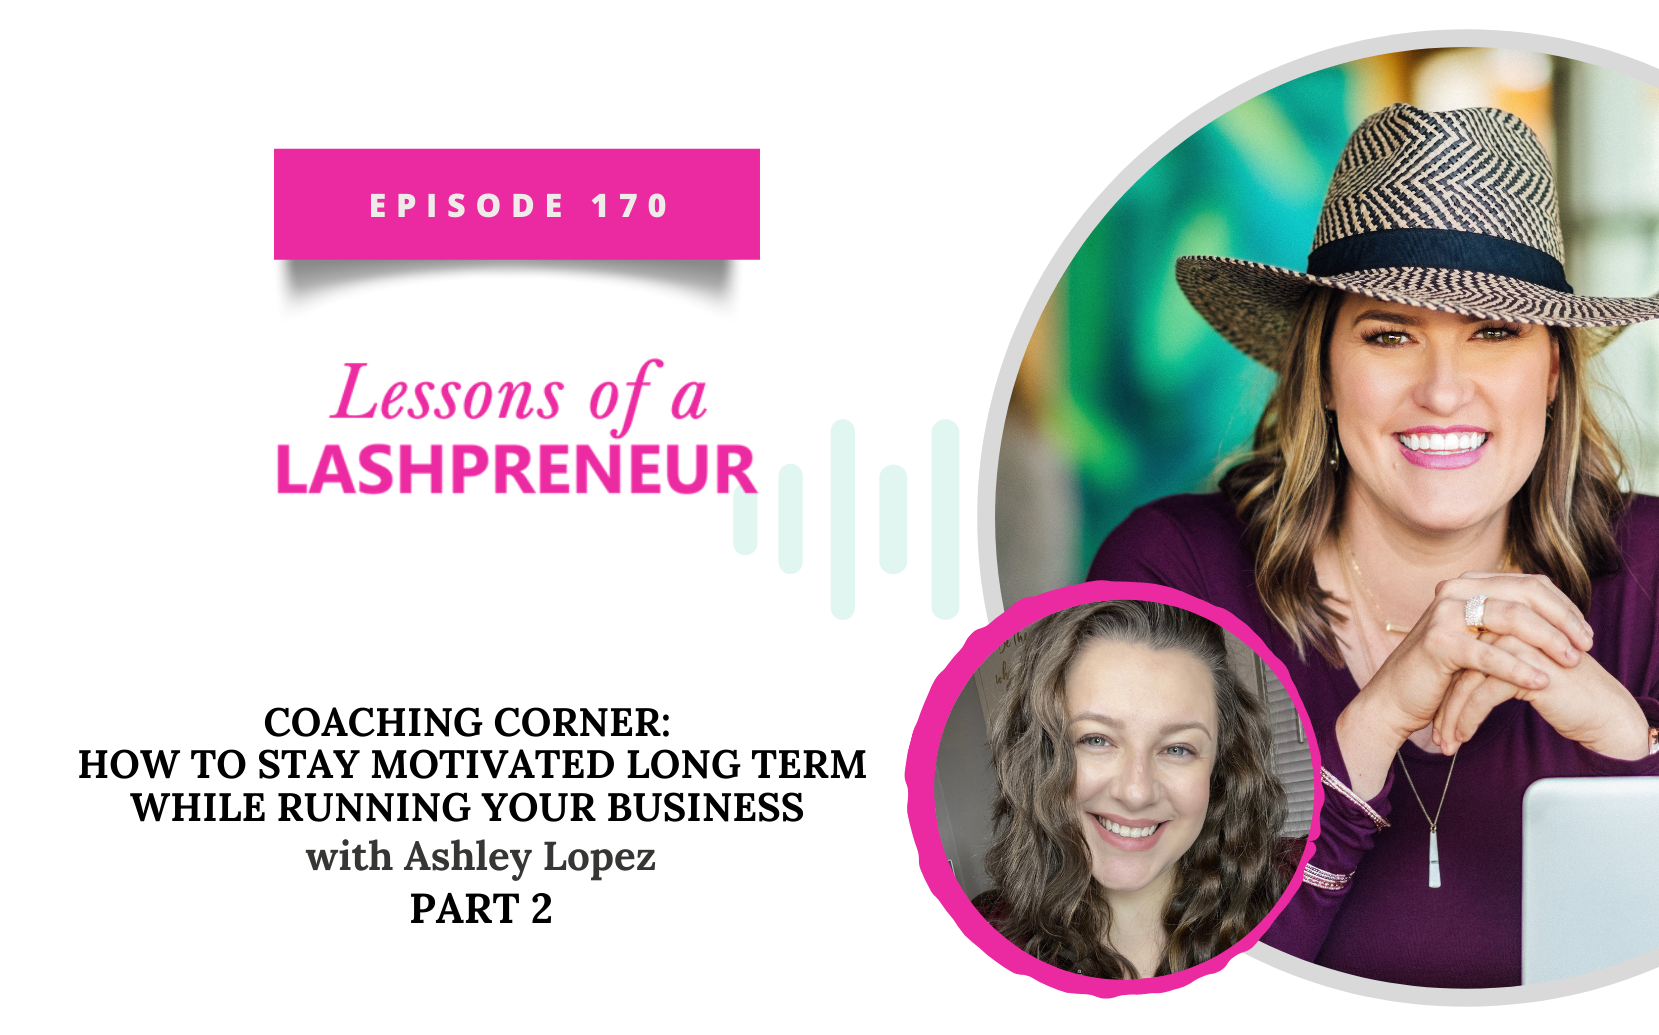 Coaching Corner: How to Stay Motivated Long Term While Running Your Business with Ashley Lopez Part 2